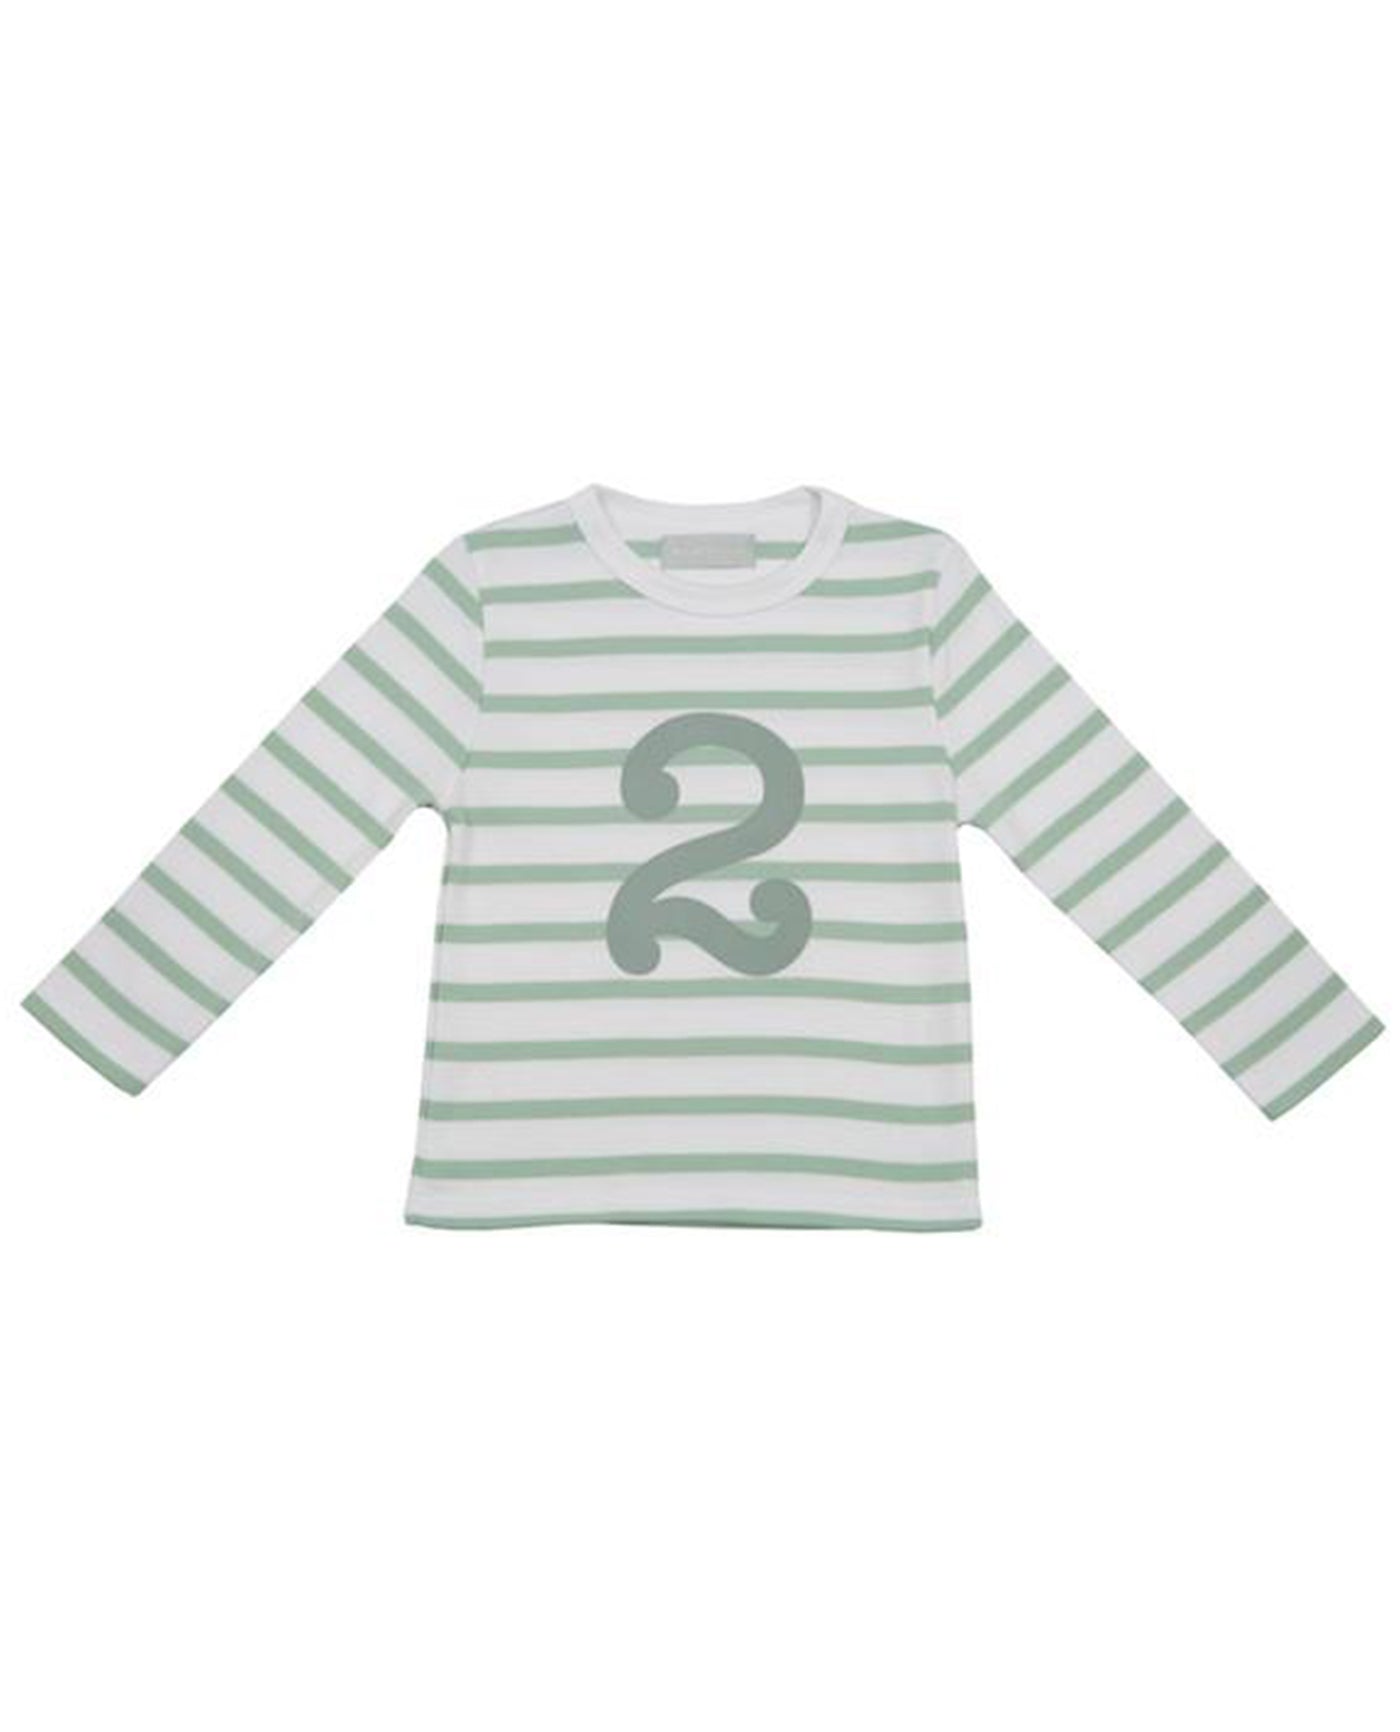 Bob and Blossom Seafoam and White Striped Number T-Shirt